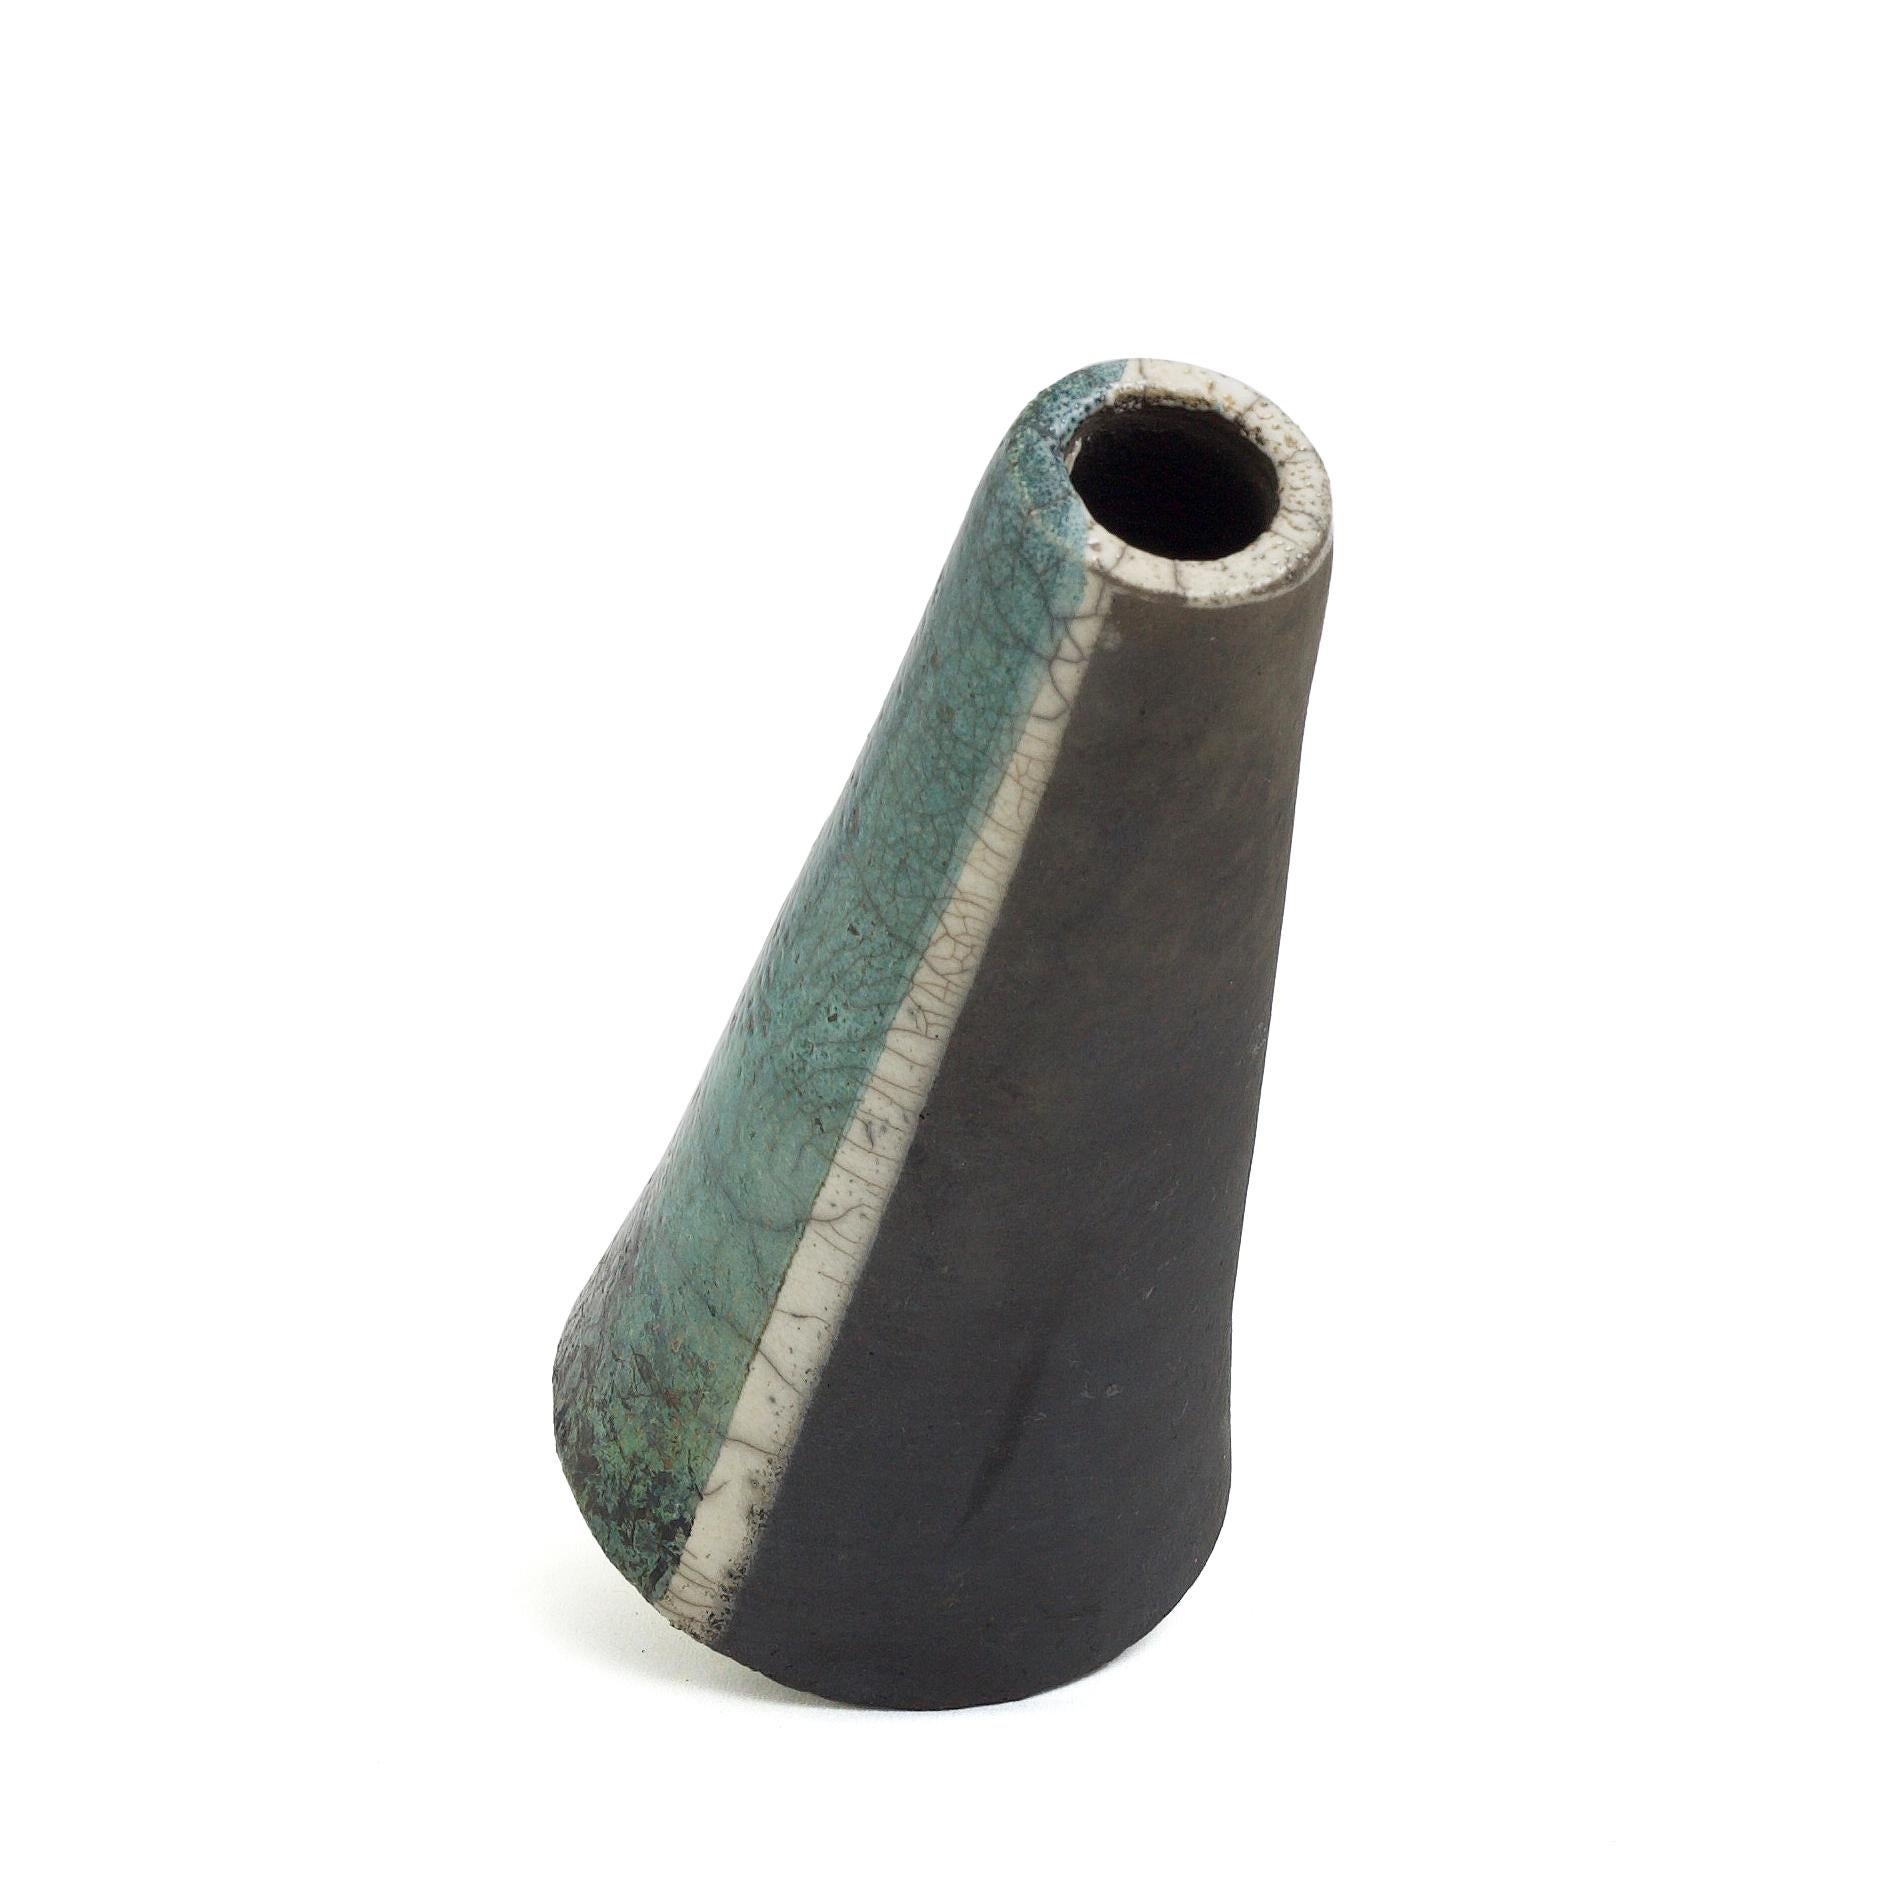 Japanese Modern LAAB Wake Vase Raku Ceramic Green White Black Metal In New Condition For Sale In monza, Monza and Brianza